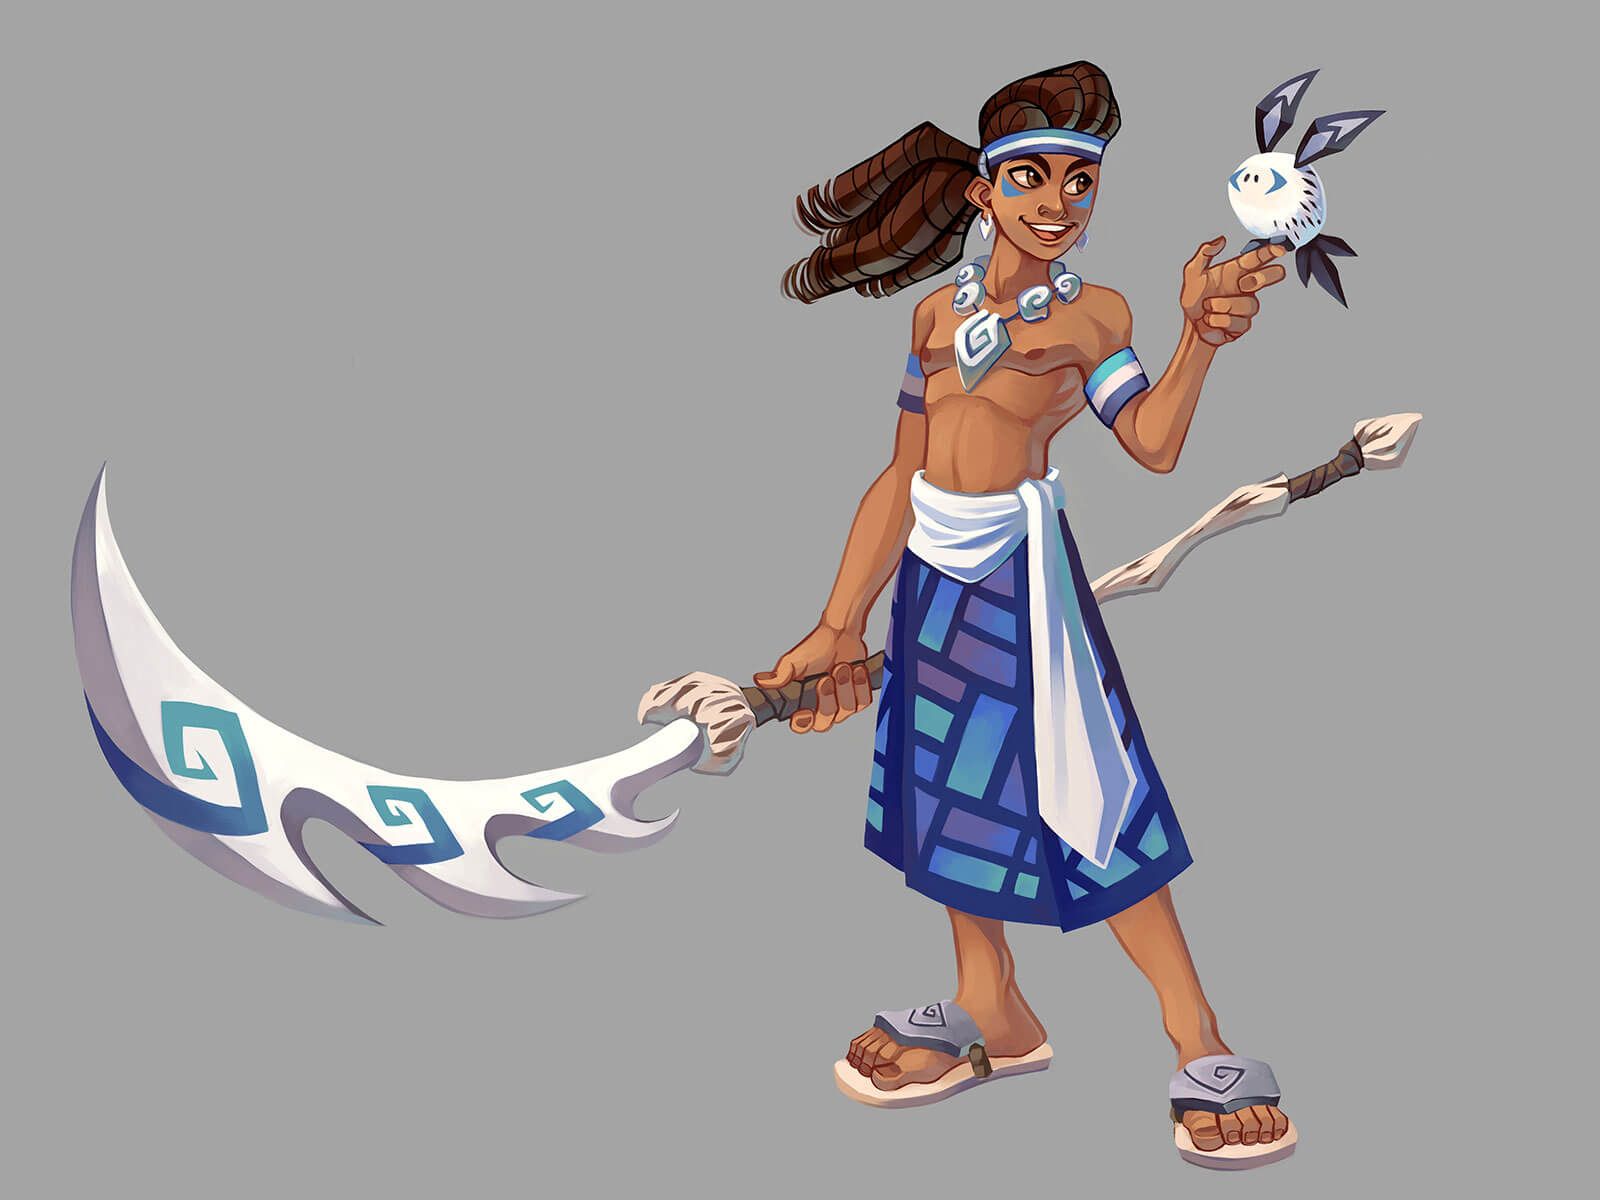 Man with spear in stylized Pacific Islander dress